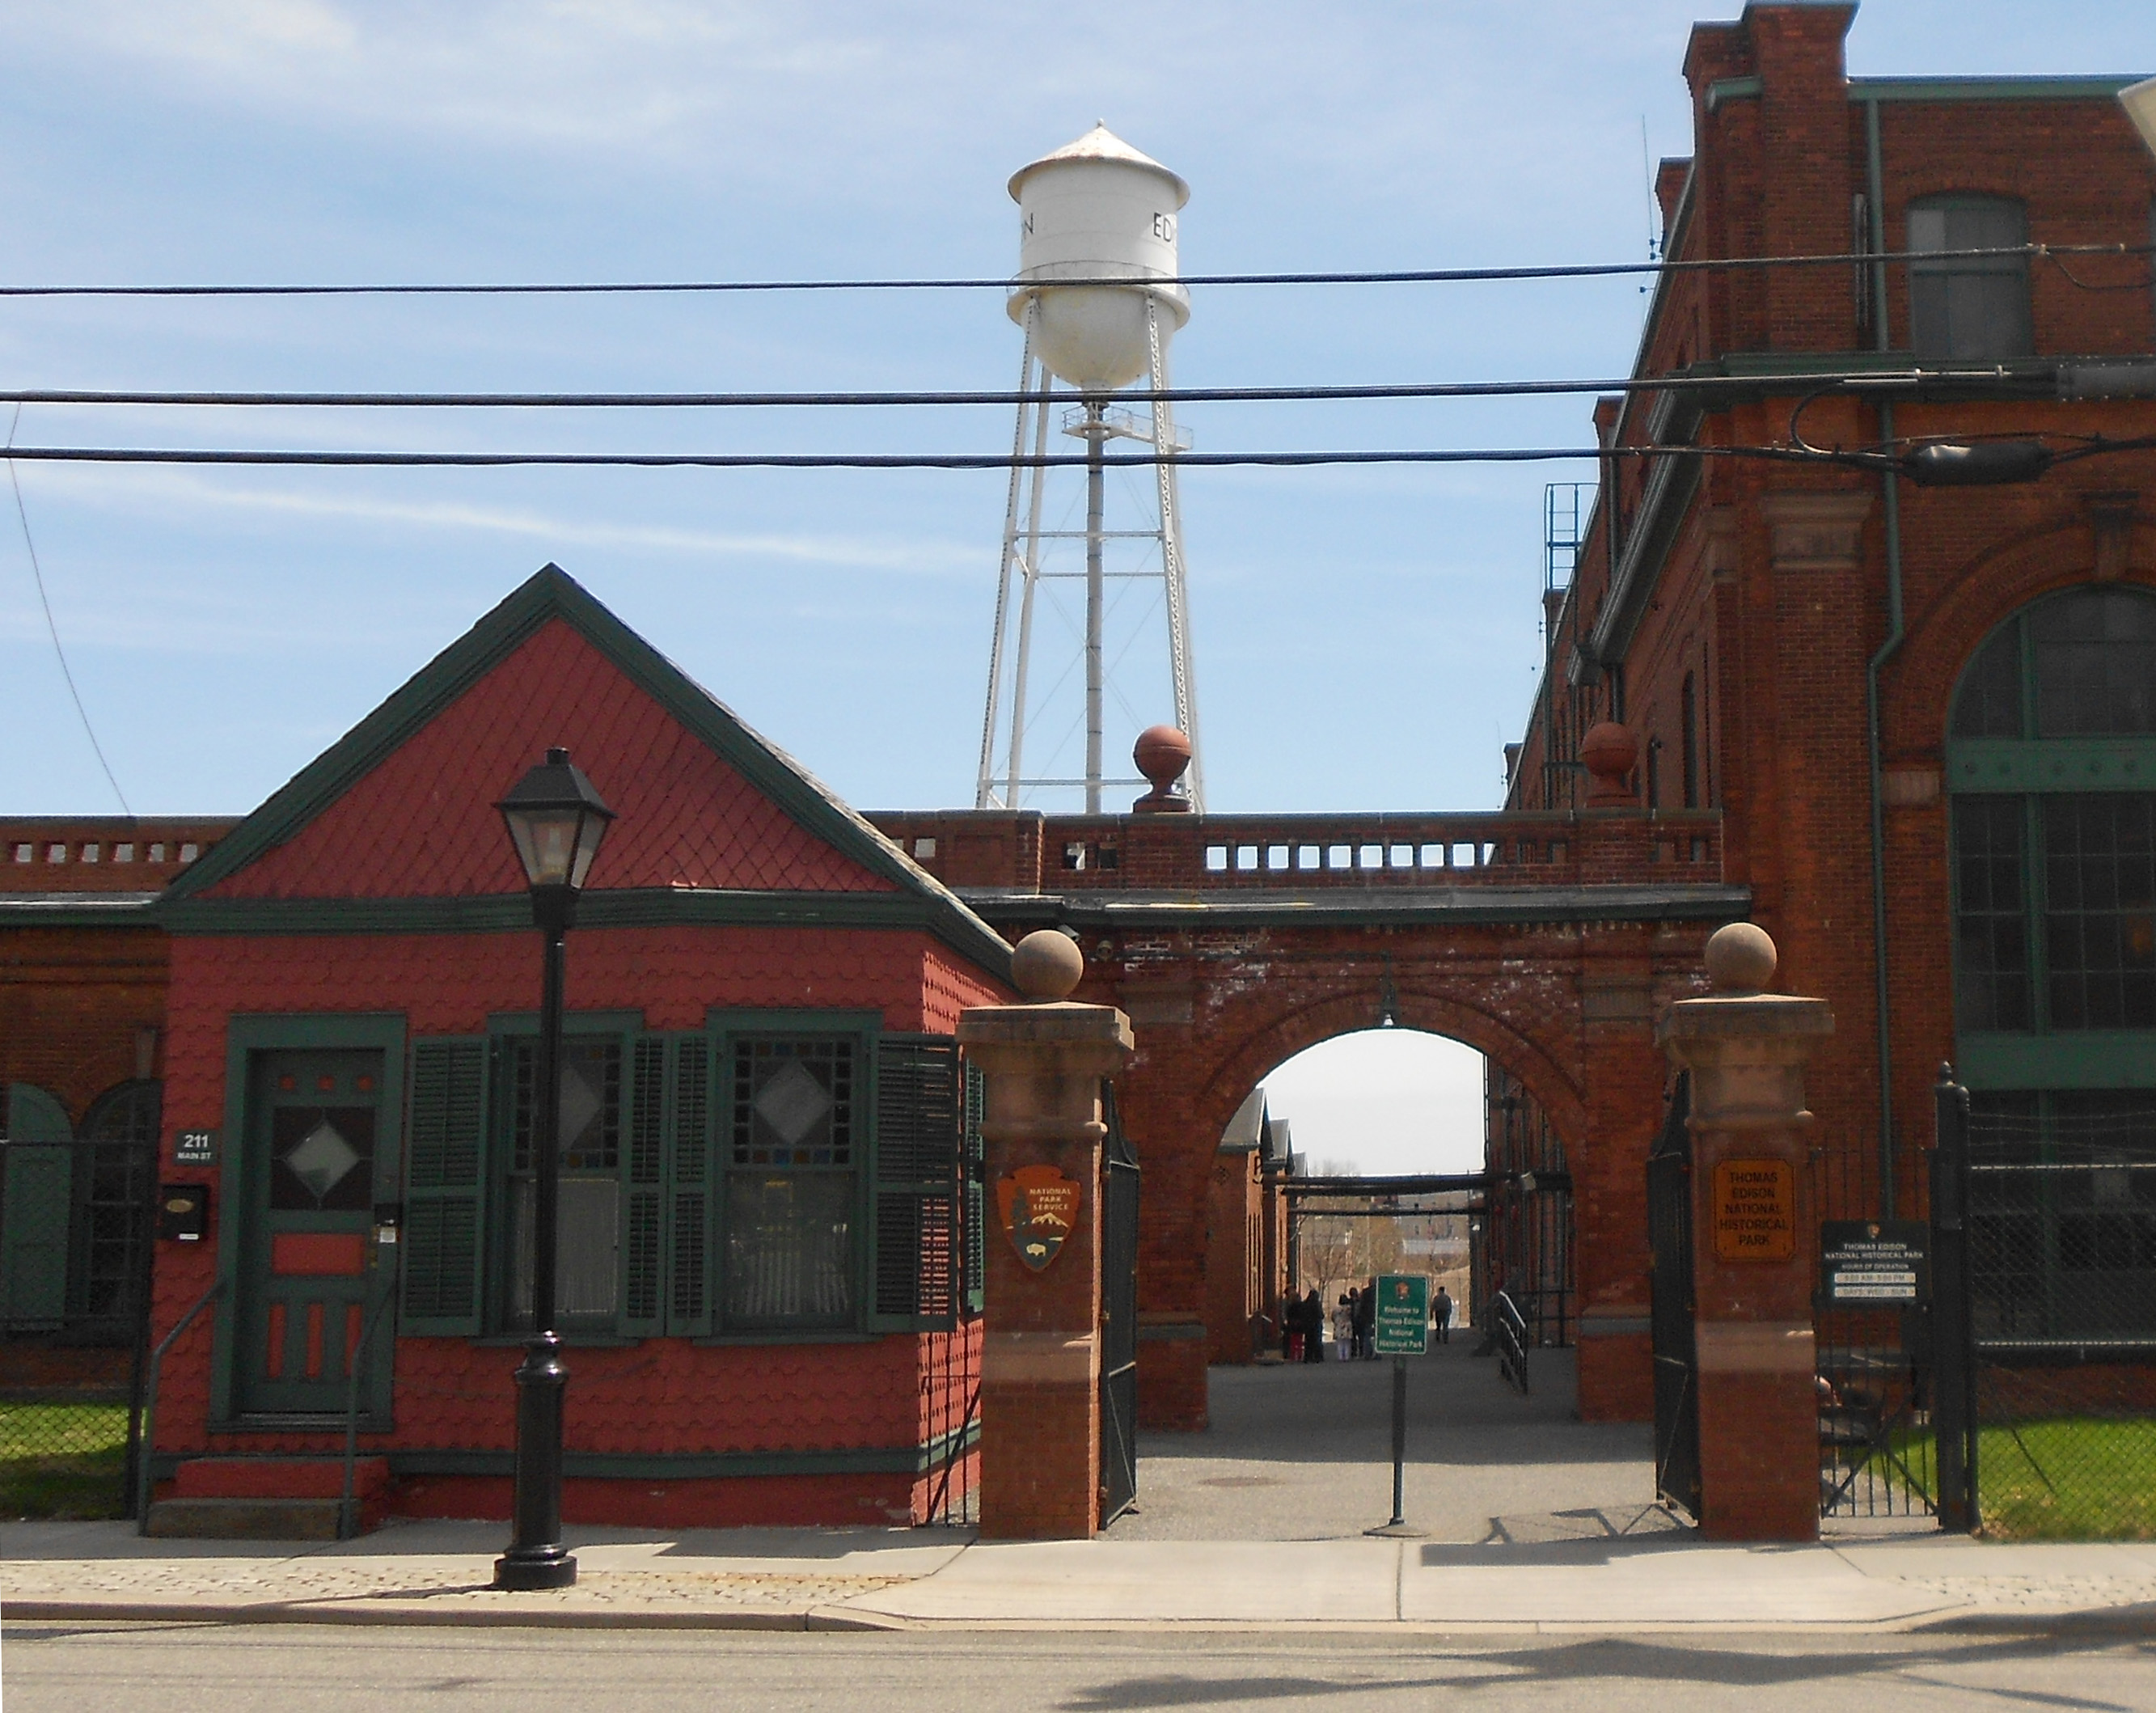 Small red building next to large brick building with a water tower in the background.